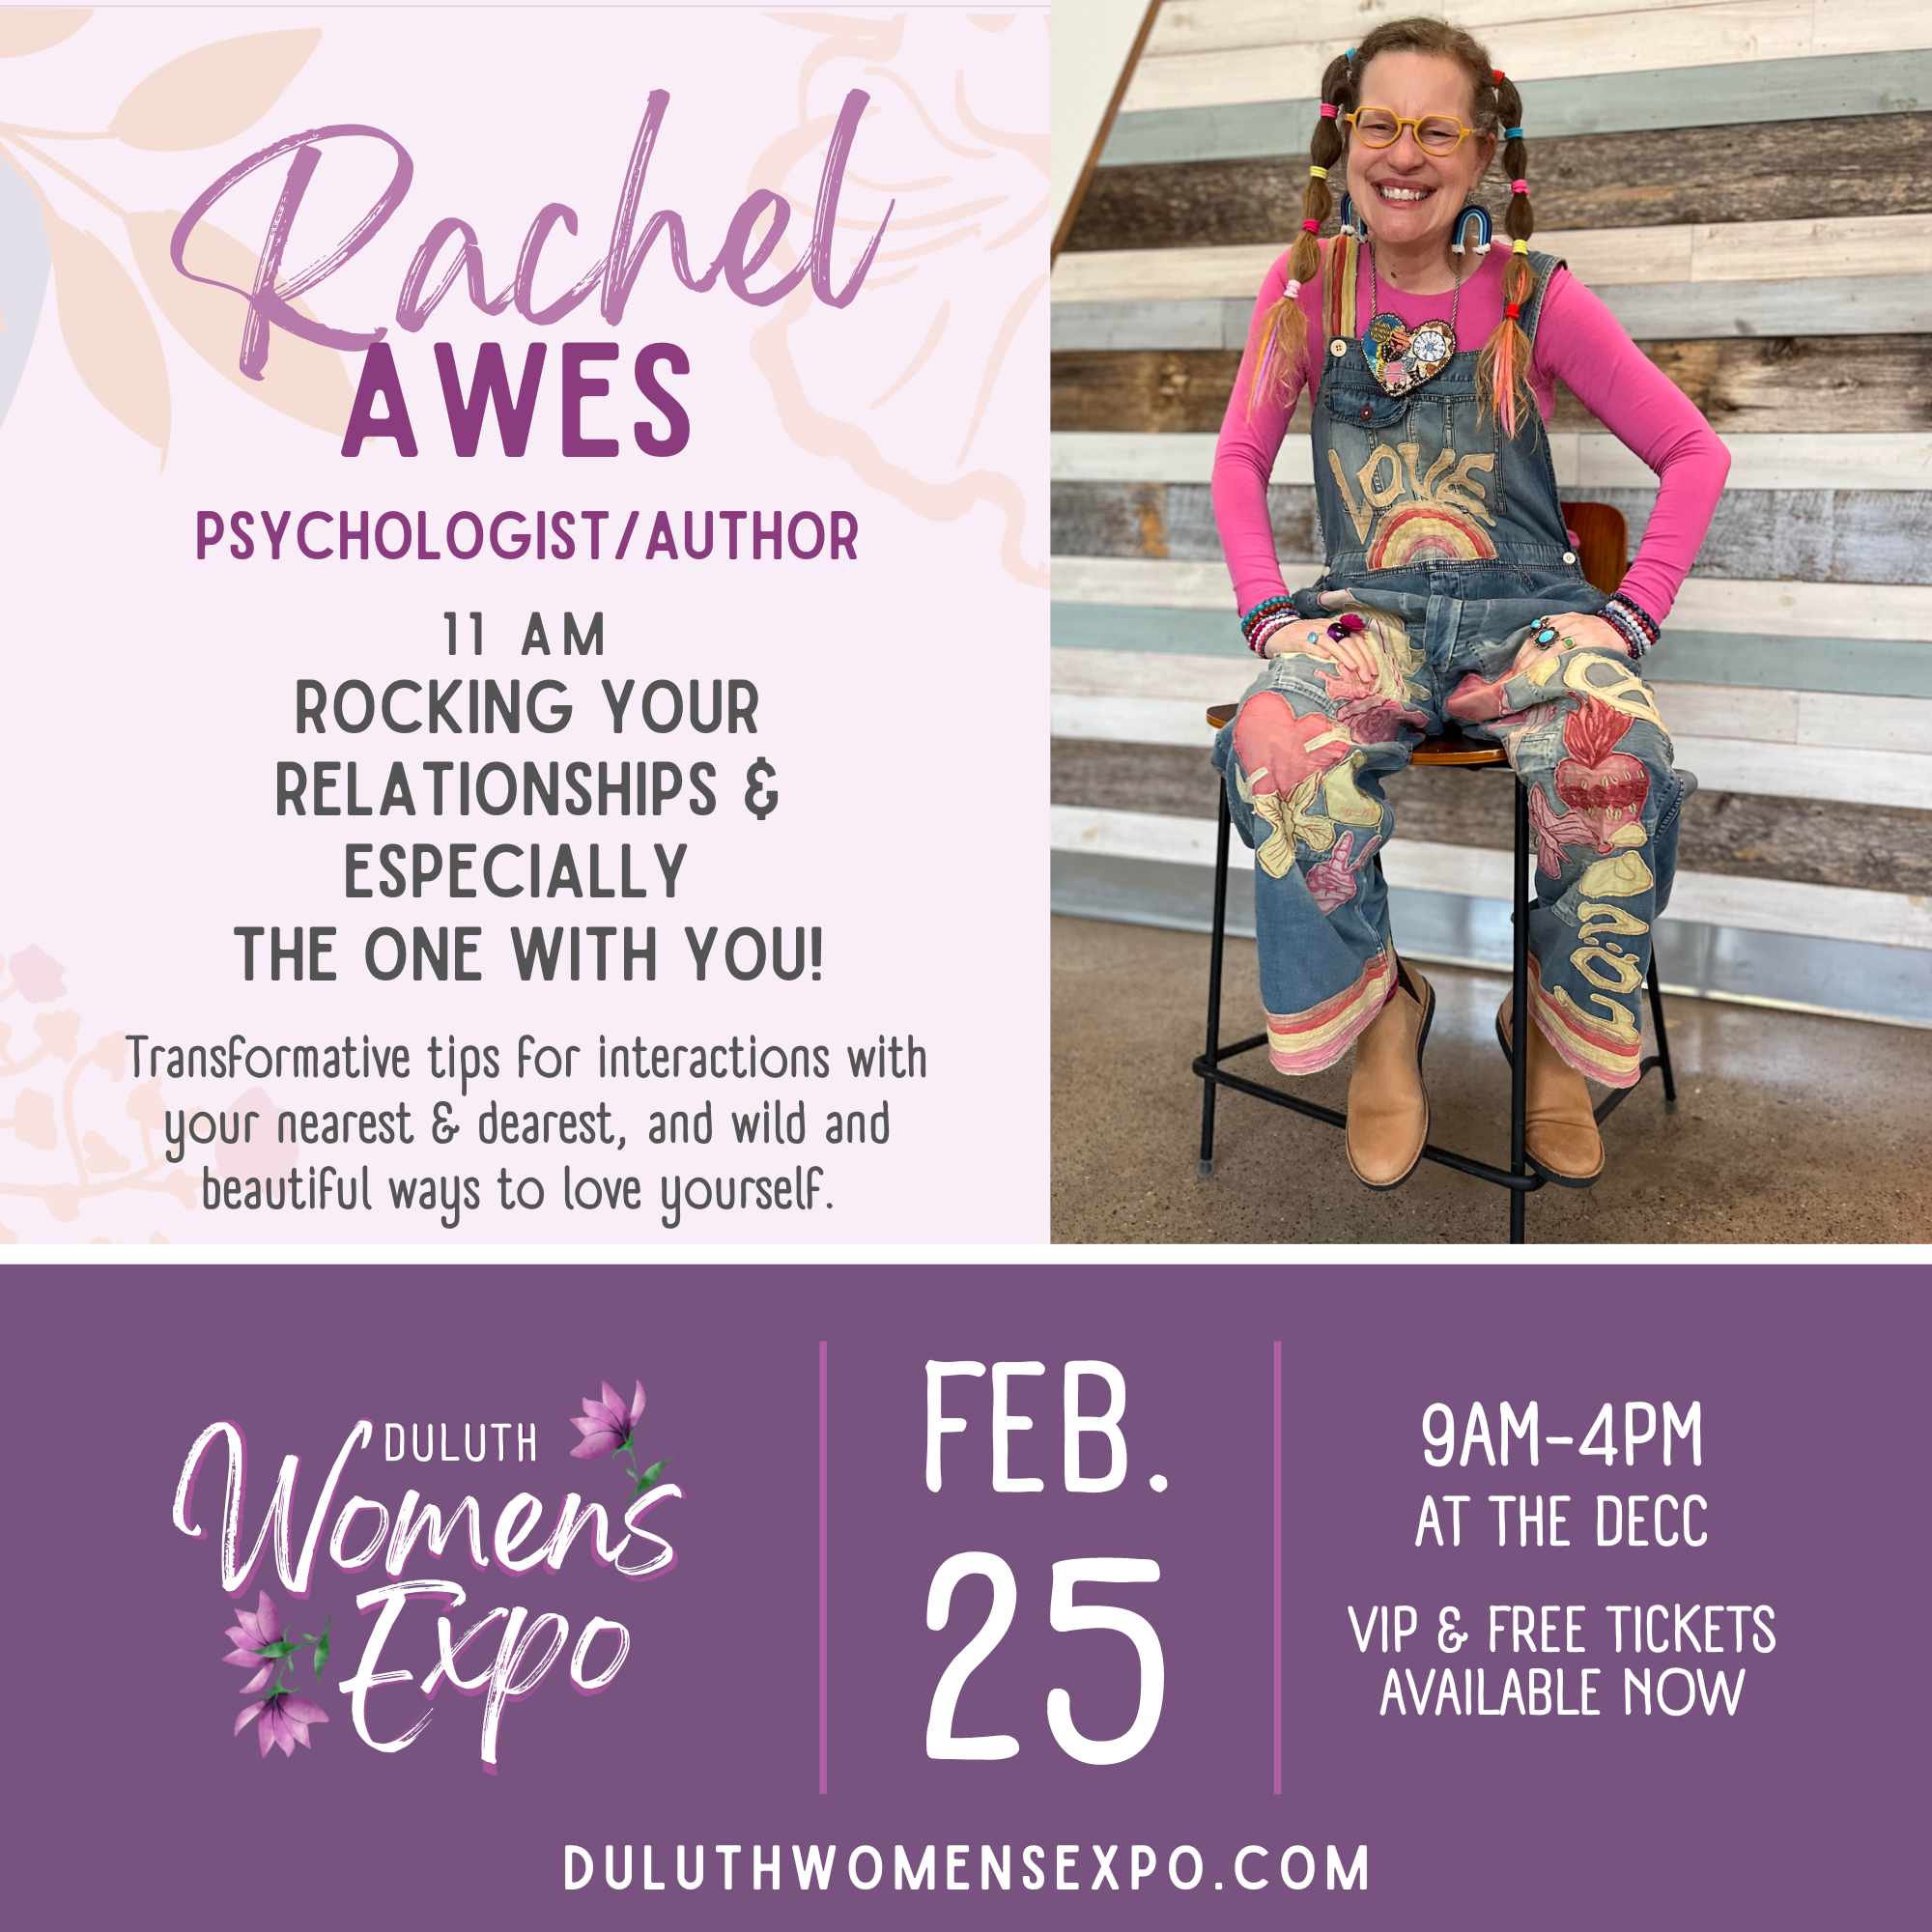 Rocking Your Relationships & Especially the One with You! by psychologist and author Rachel Awes at 11am